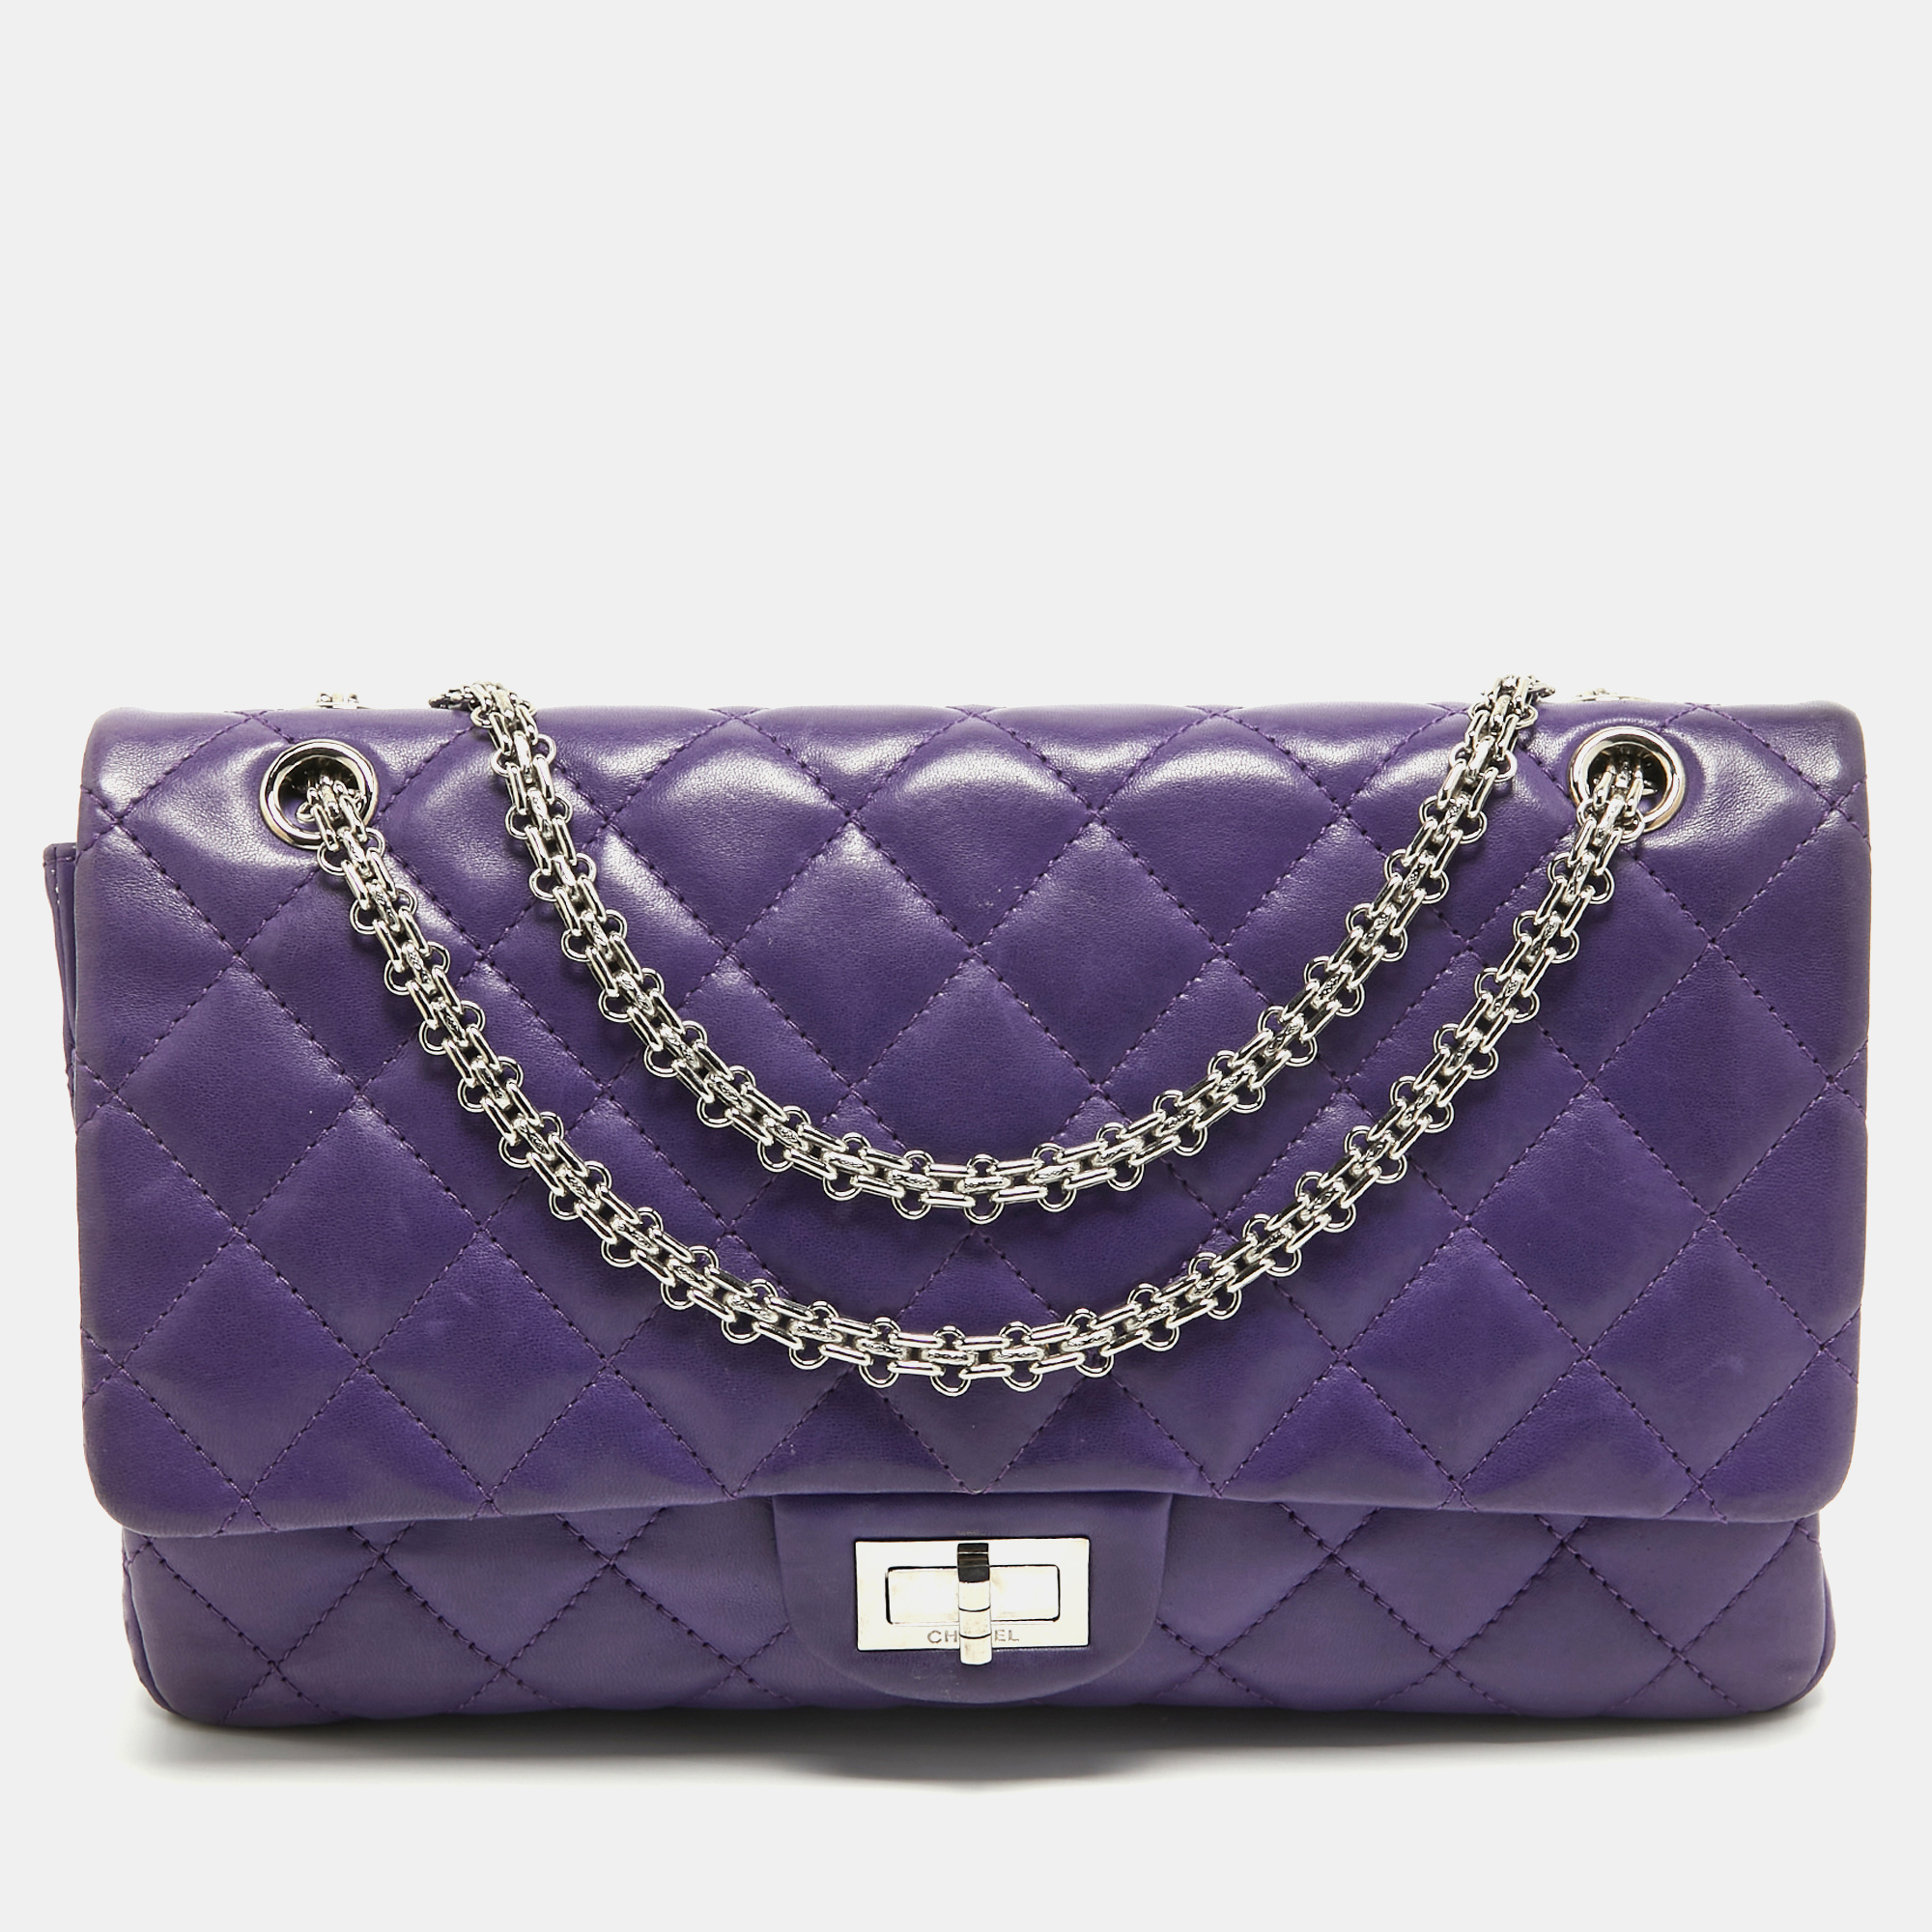 Pre-owned Chanel Purple Quilted Leather 227 Reissue 2.55 Flap Bag